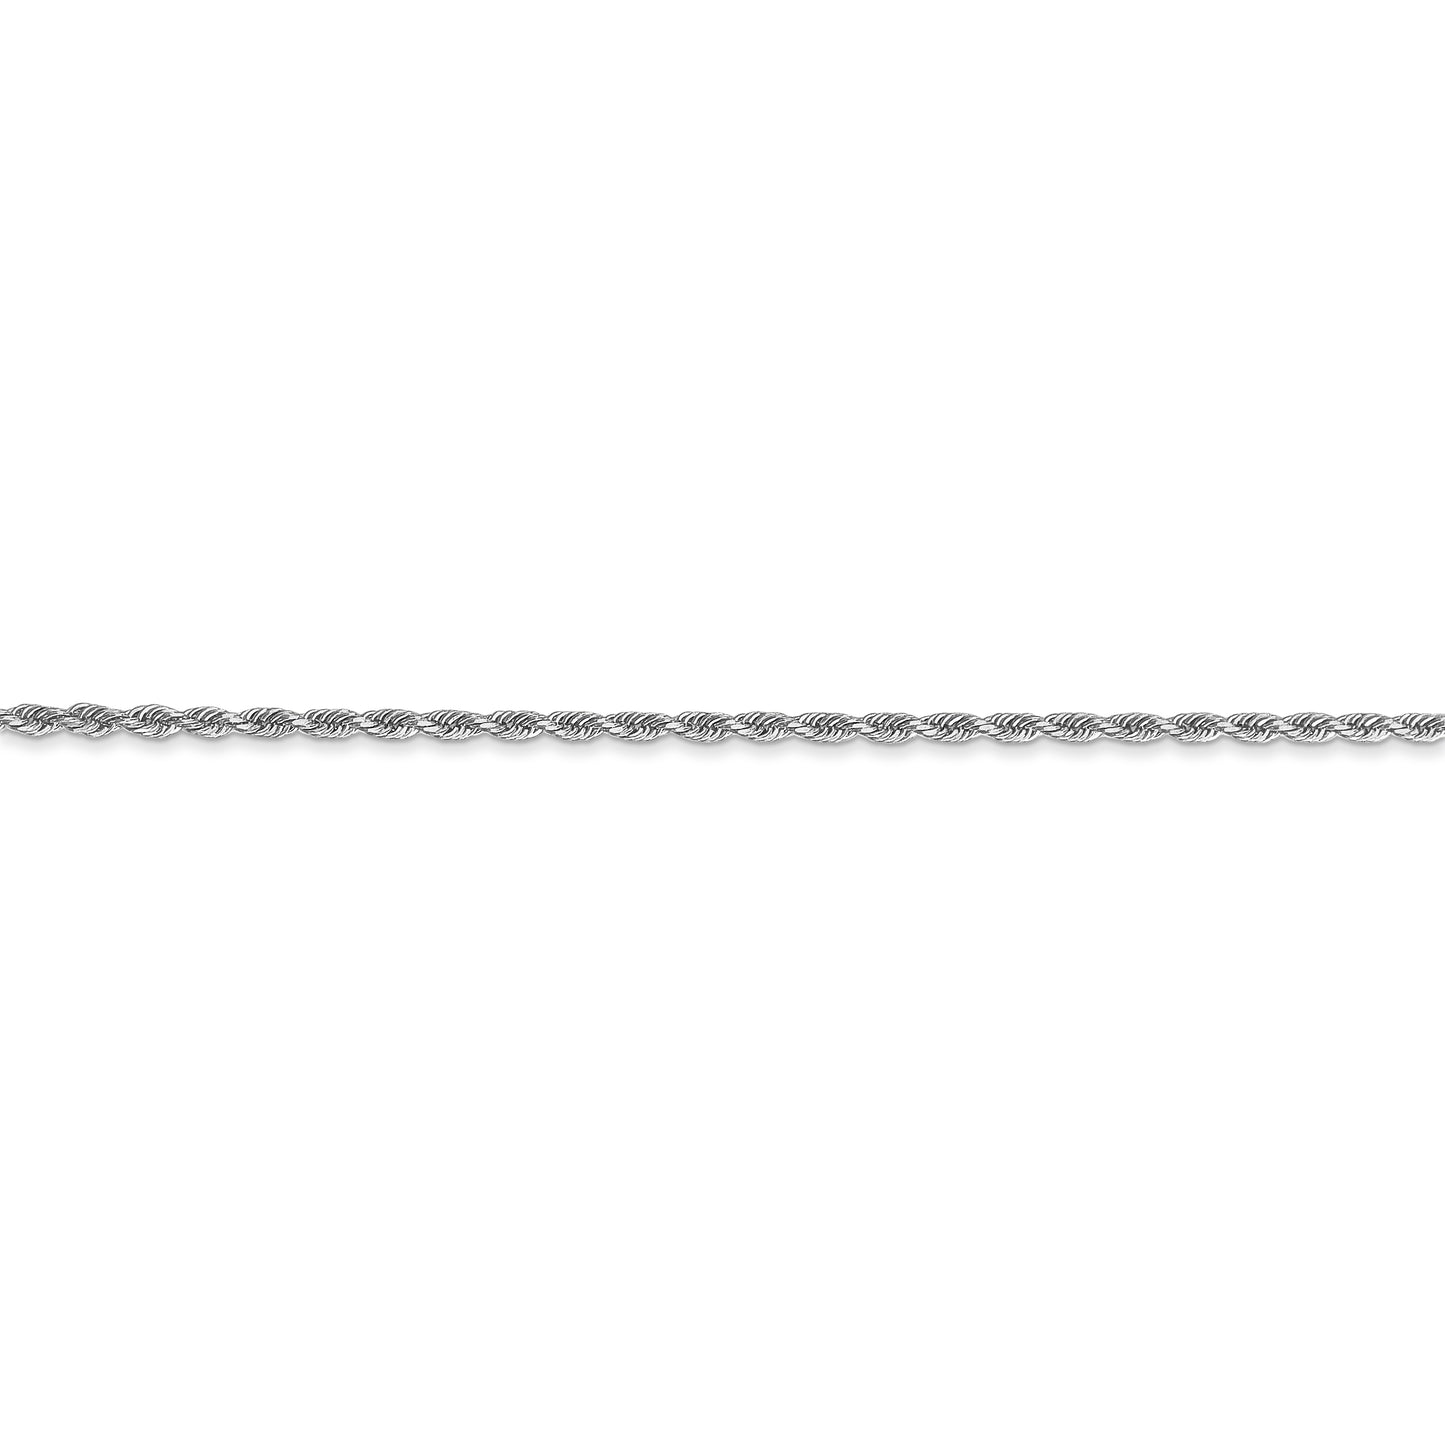 14k White Gold 2mm D/C Rope with Lobster Clasp Chain